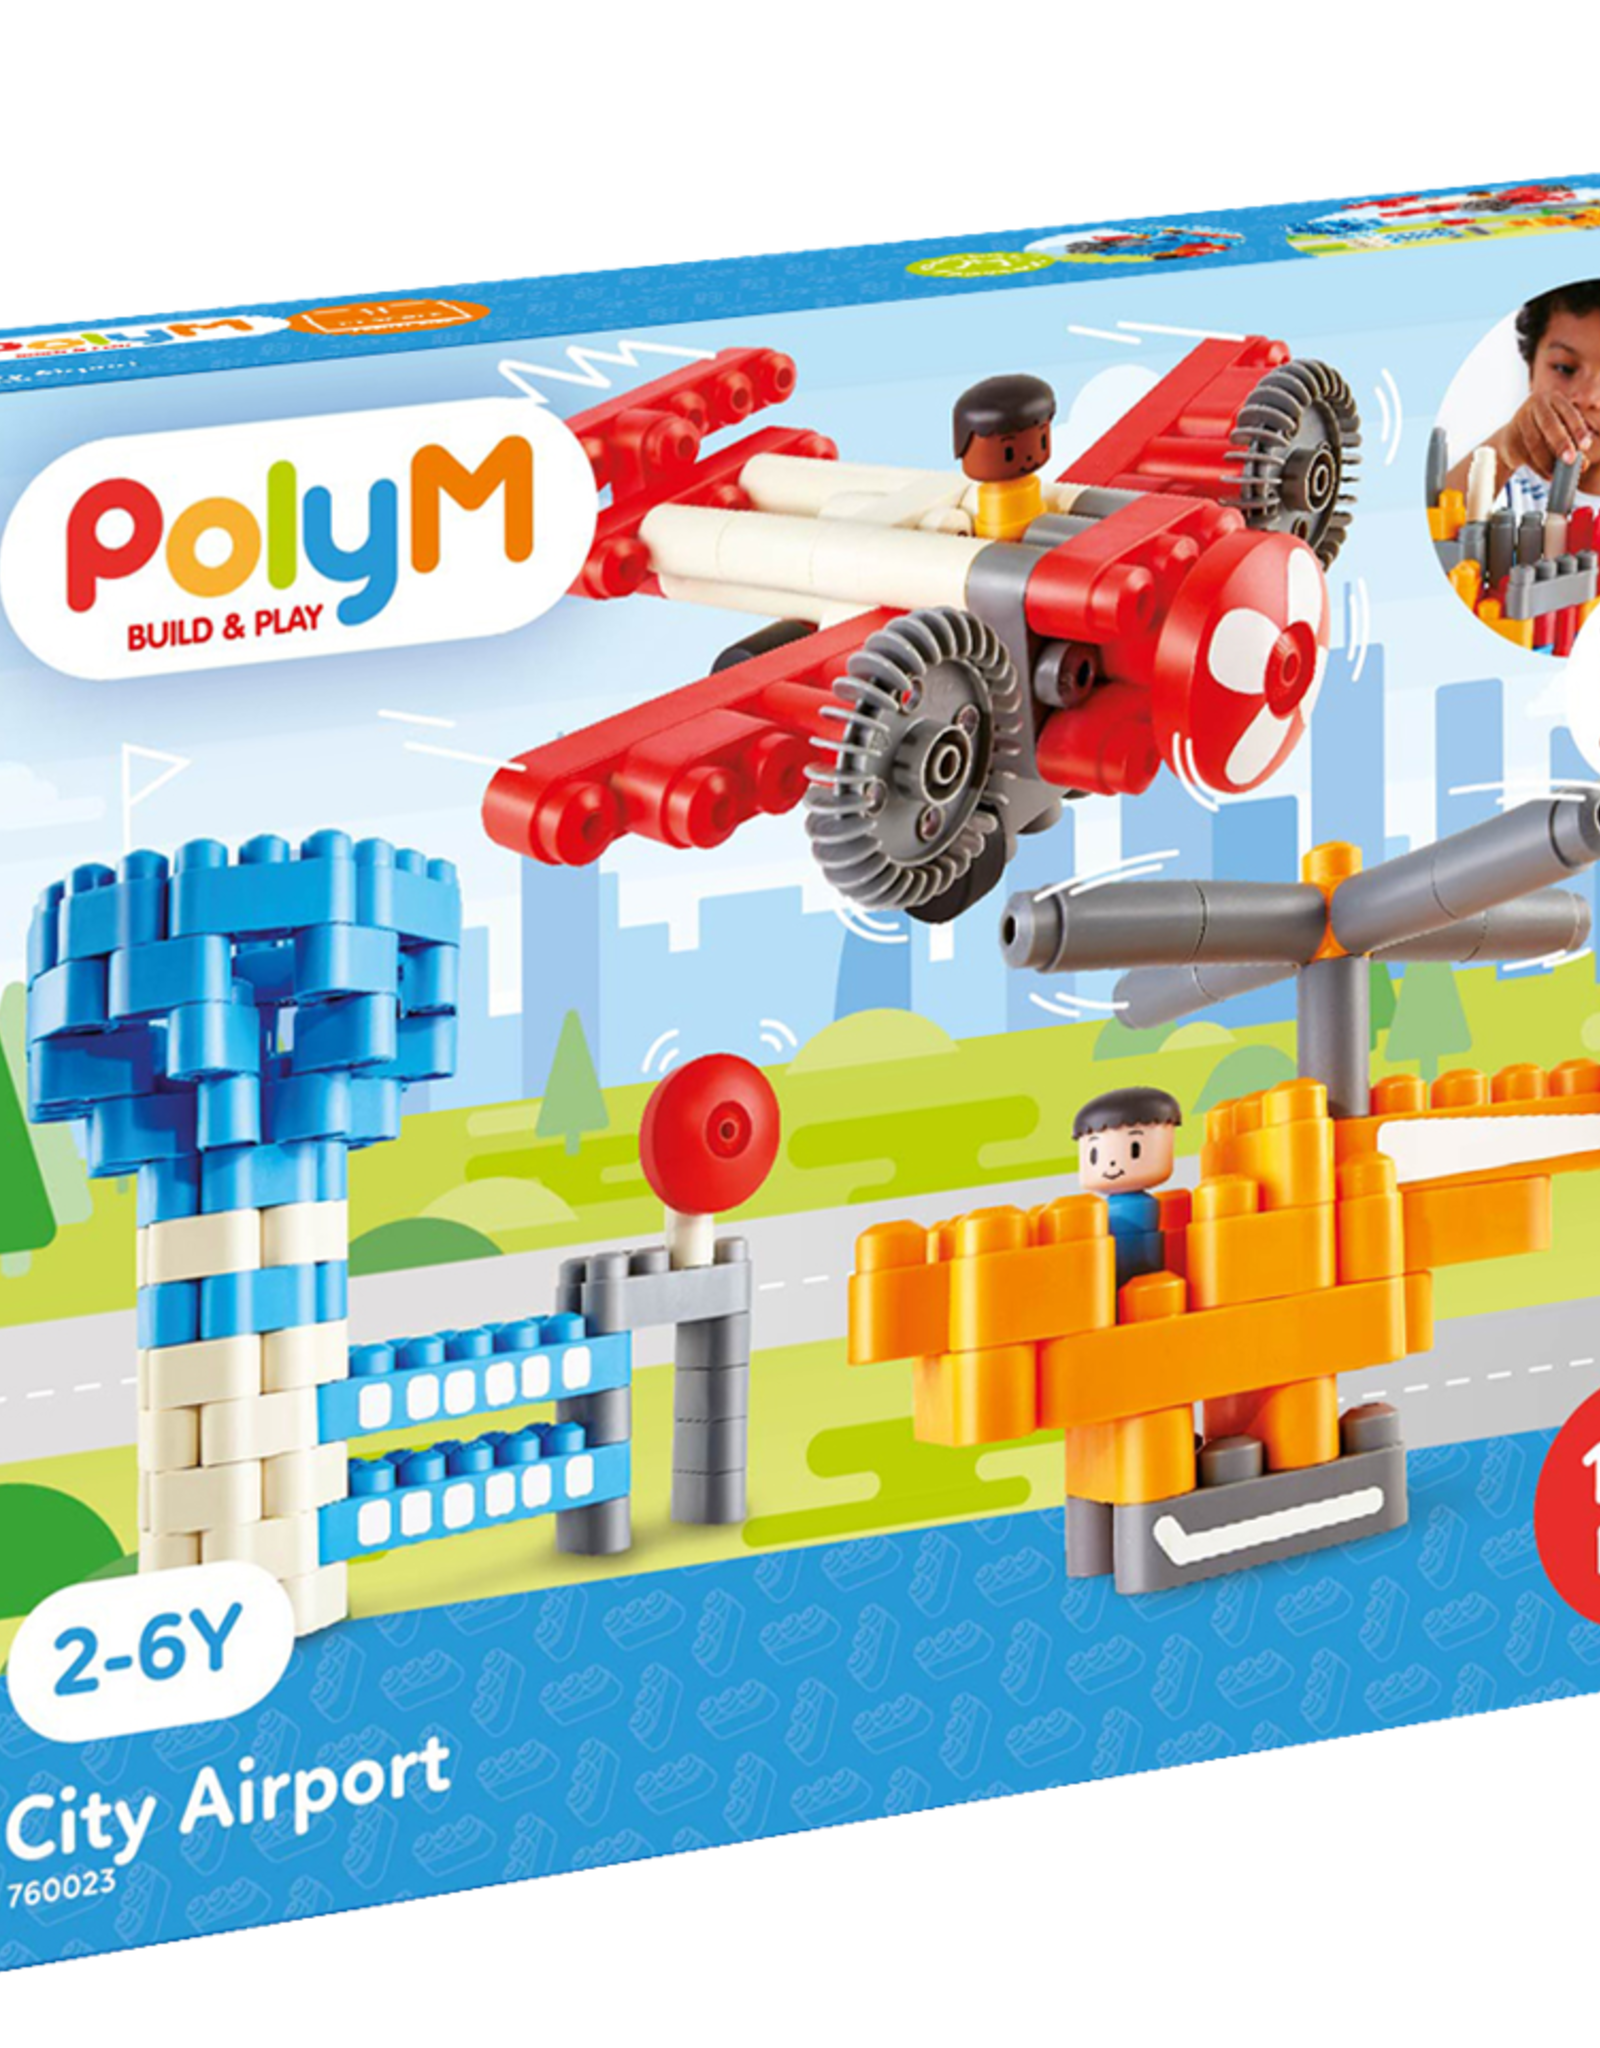 Playwell Polym - City Airport